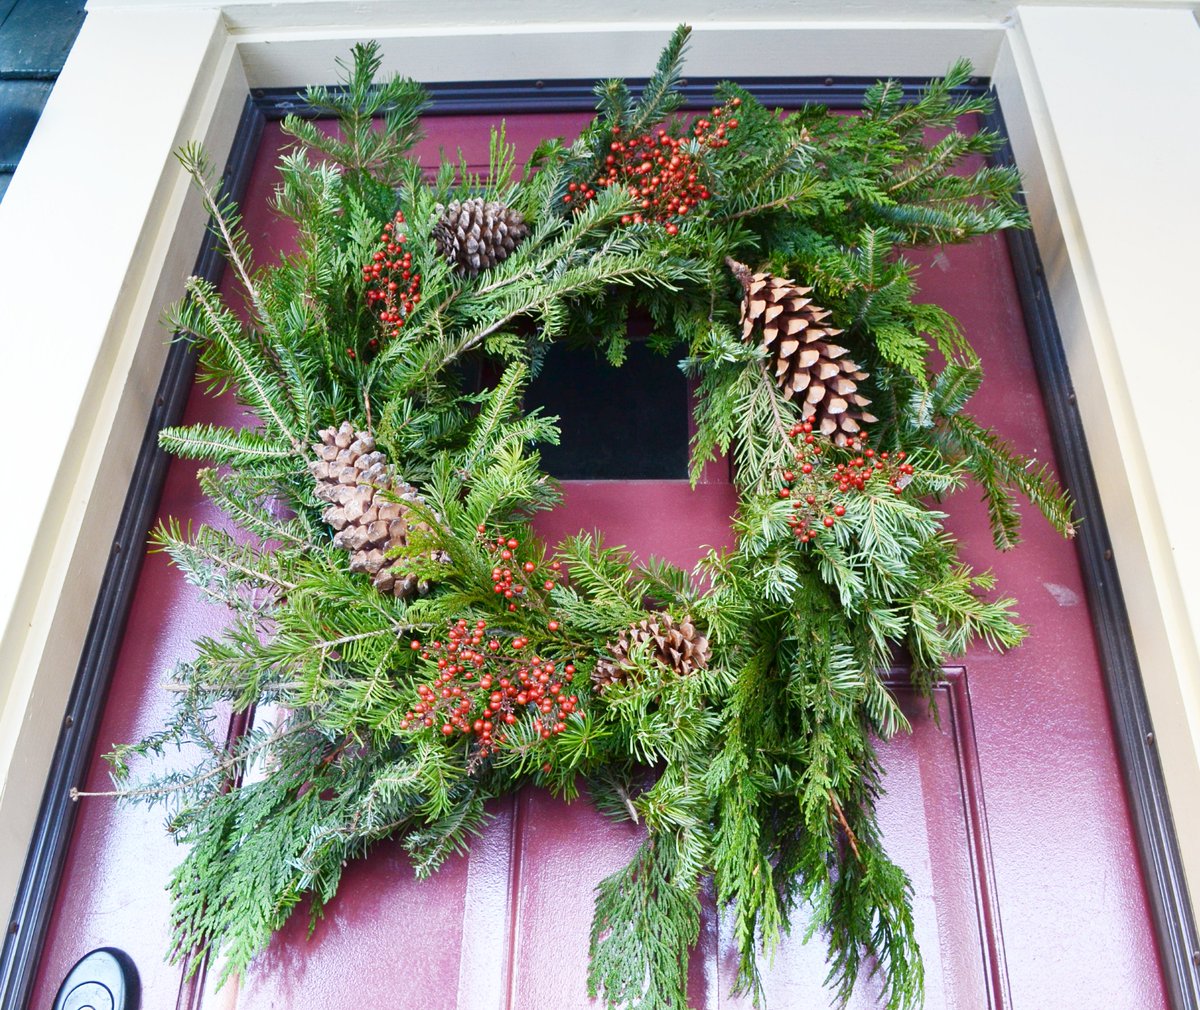 One of my favourite ways to bring nature home each winter is to make homemade wreaths for our family + neighbours, with evergreen boughs, cones and berries foraged from our local Christmas tree lot + front yard.
Just in time for #WinterSolstice this year.
#healthybynature